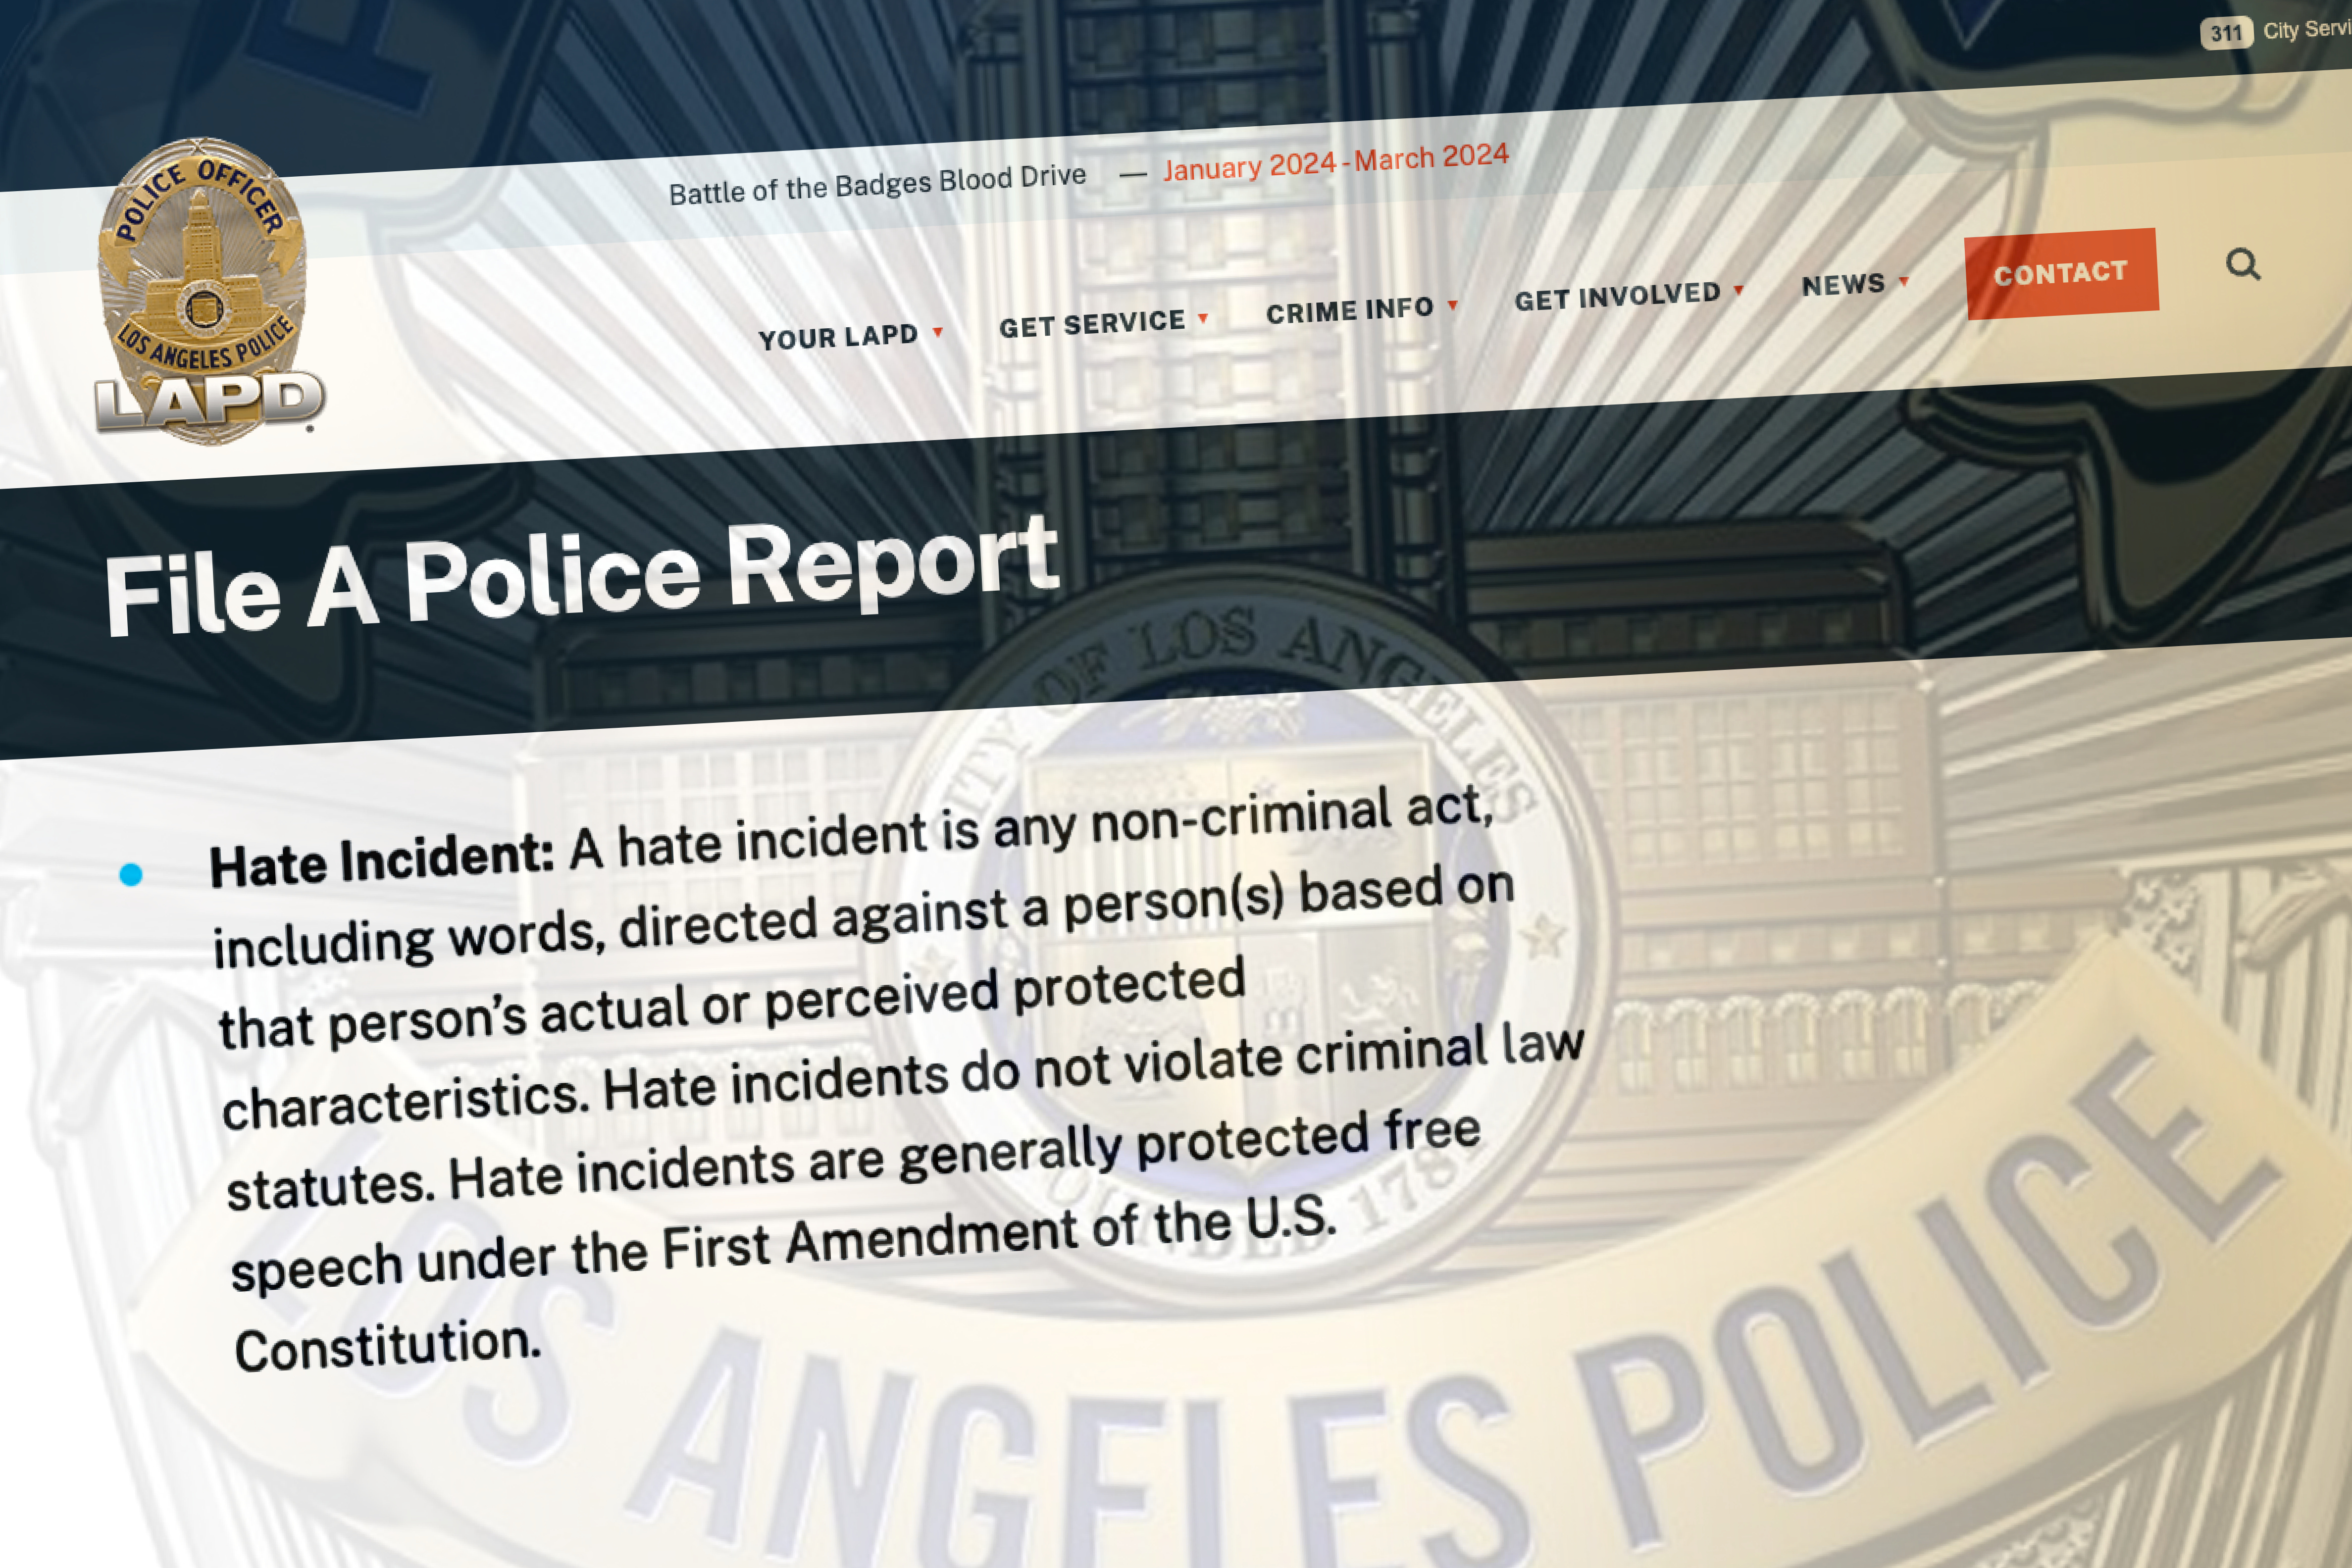 LAPD hate incidents